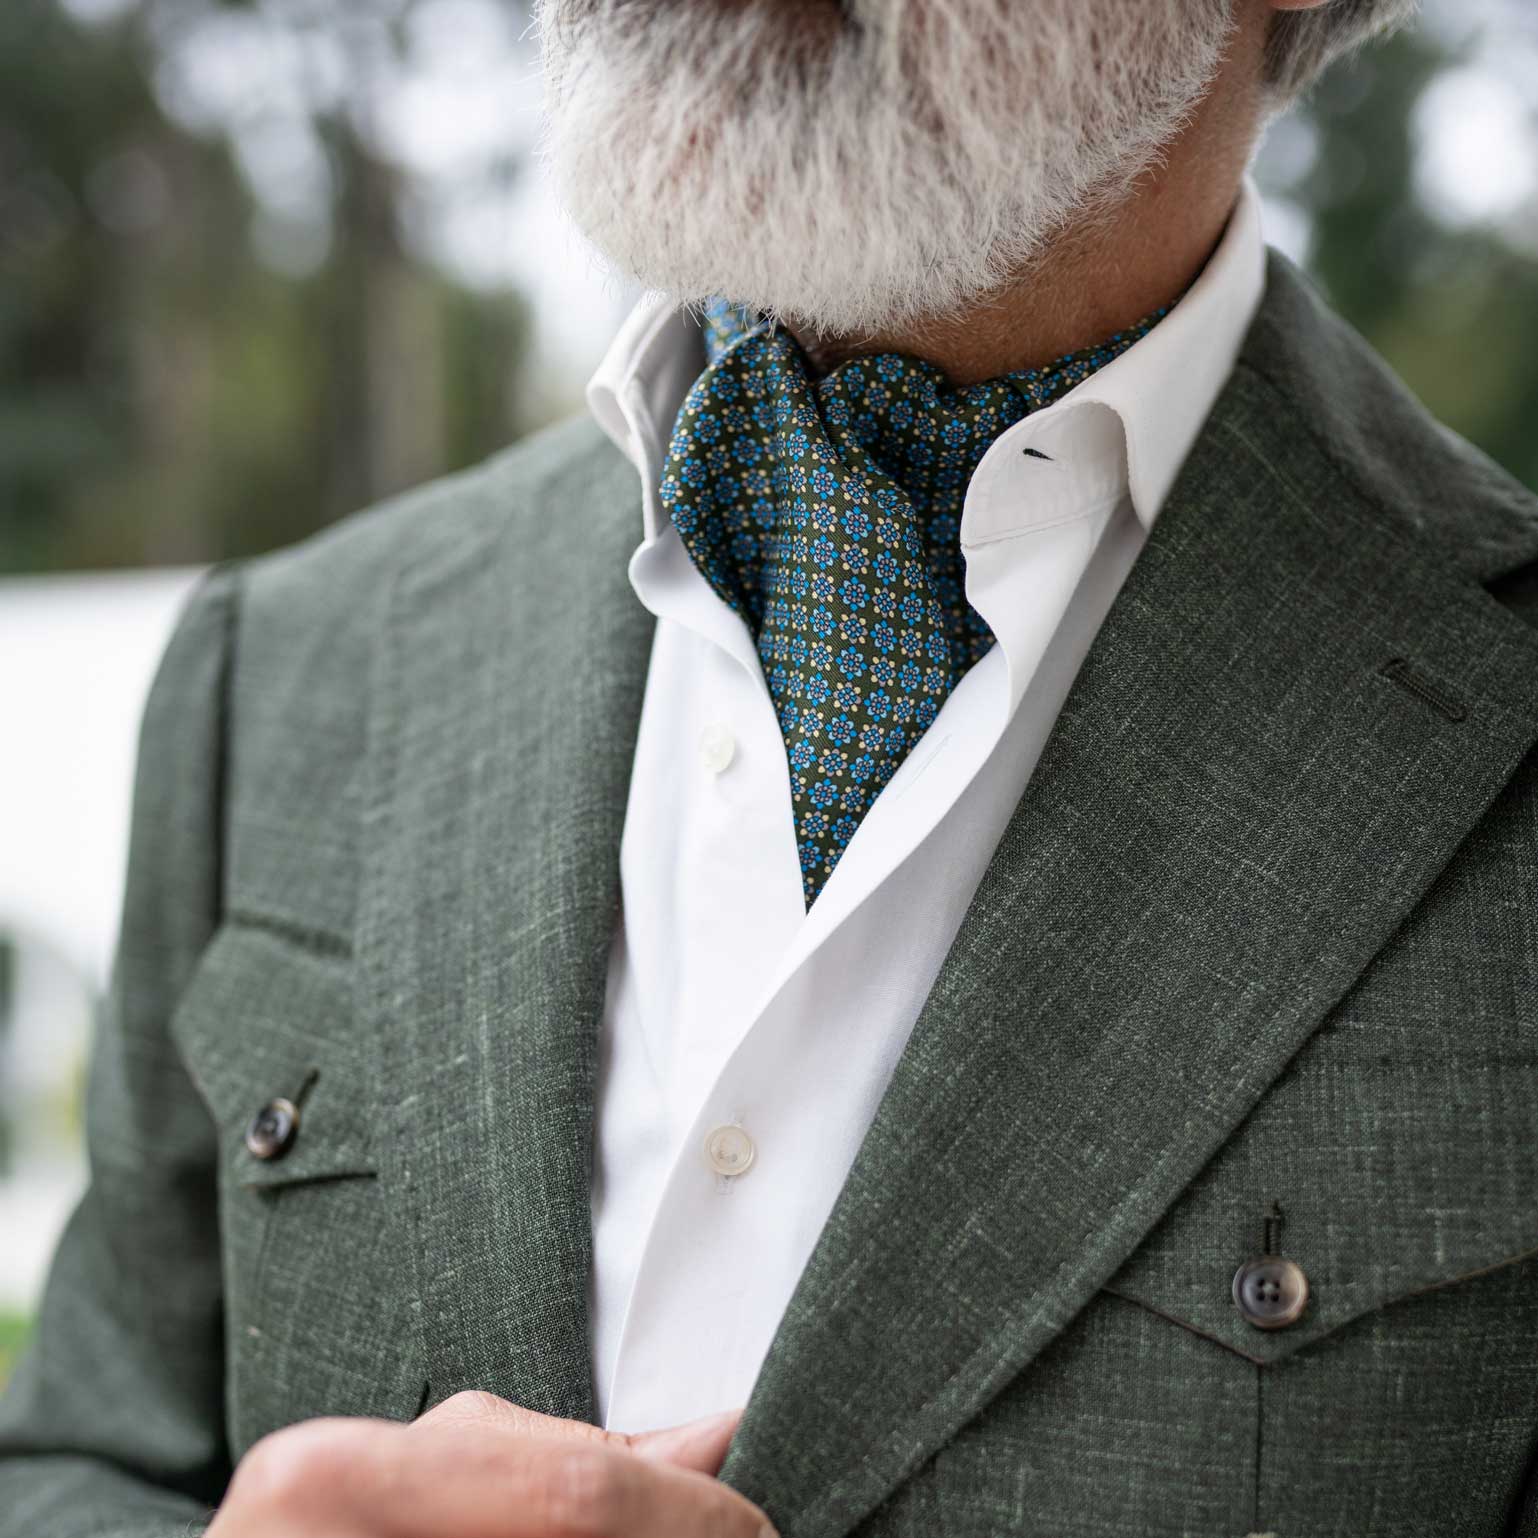 How to Tie an Ascot or Cravat without it coming undone, The Day